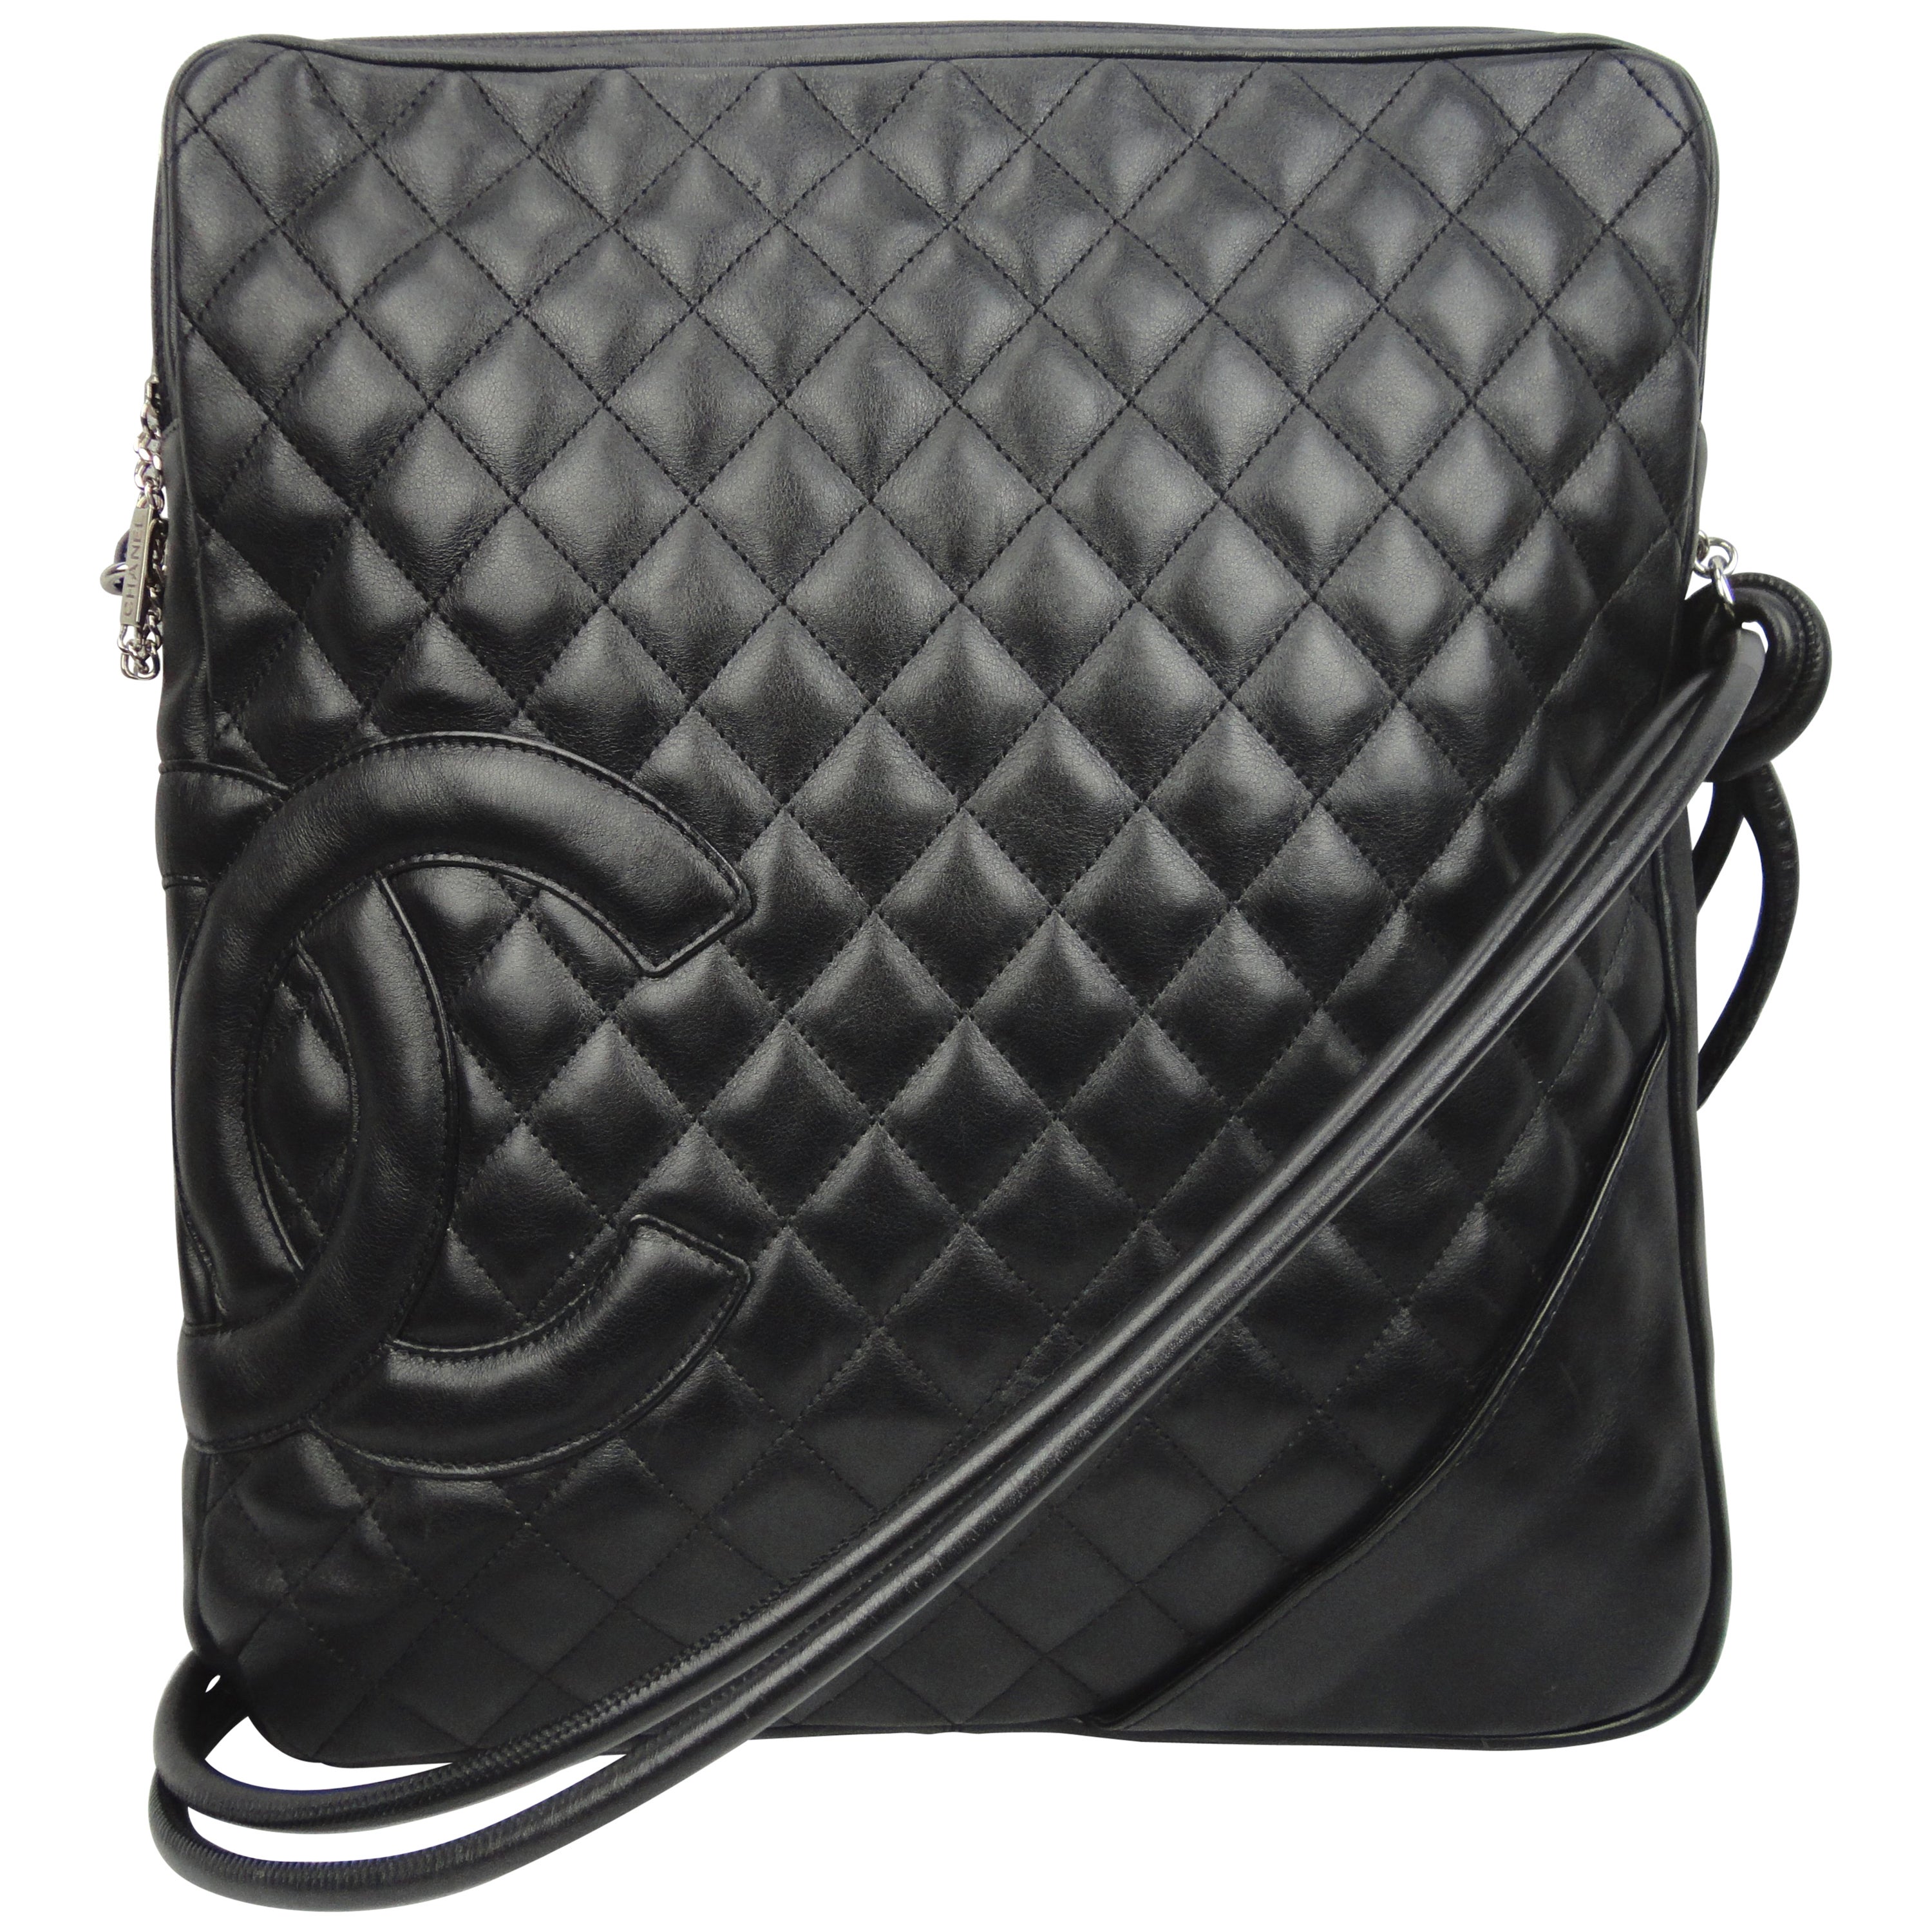 Chanel Mademoiselle Bag with integral Purse For Sale at 1stDibs